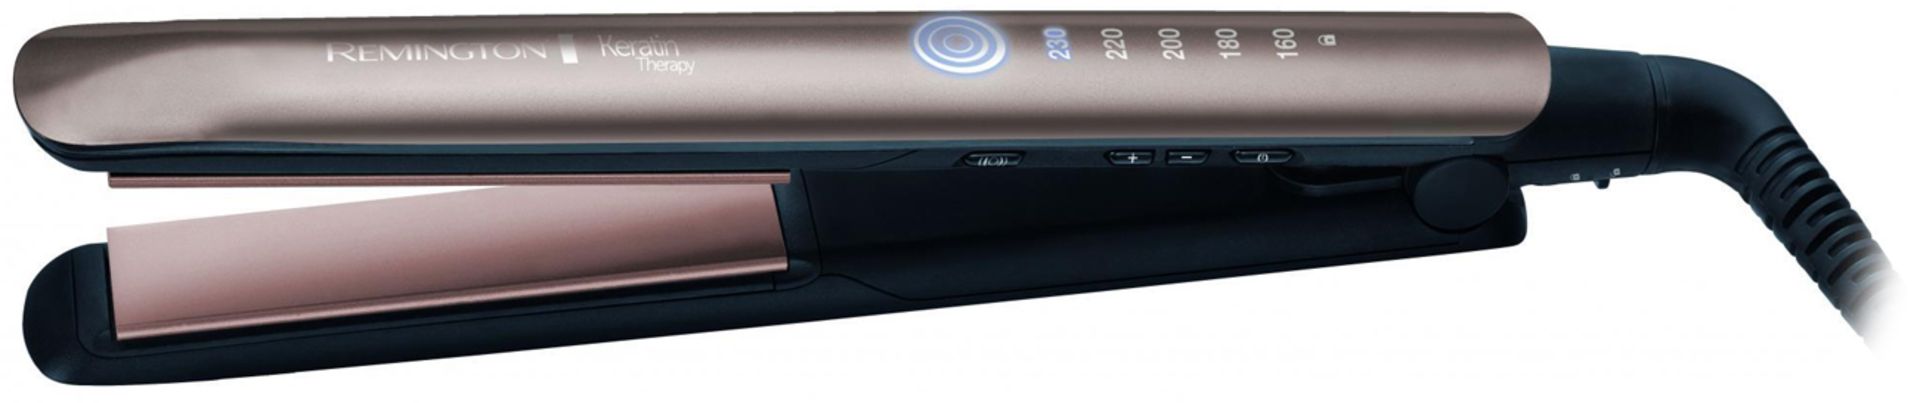 V *TRADE QTY* Brand New Remington Keratin Therapy Pro Straighteners With 57% More Protection (As